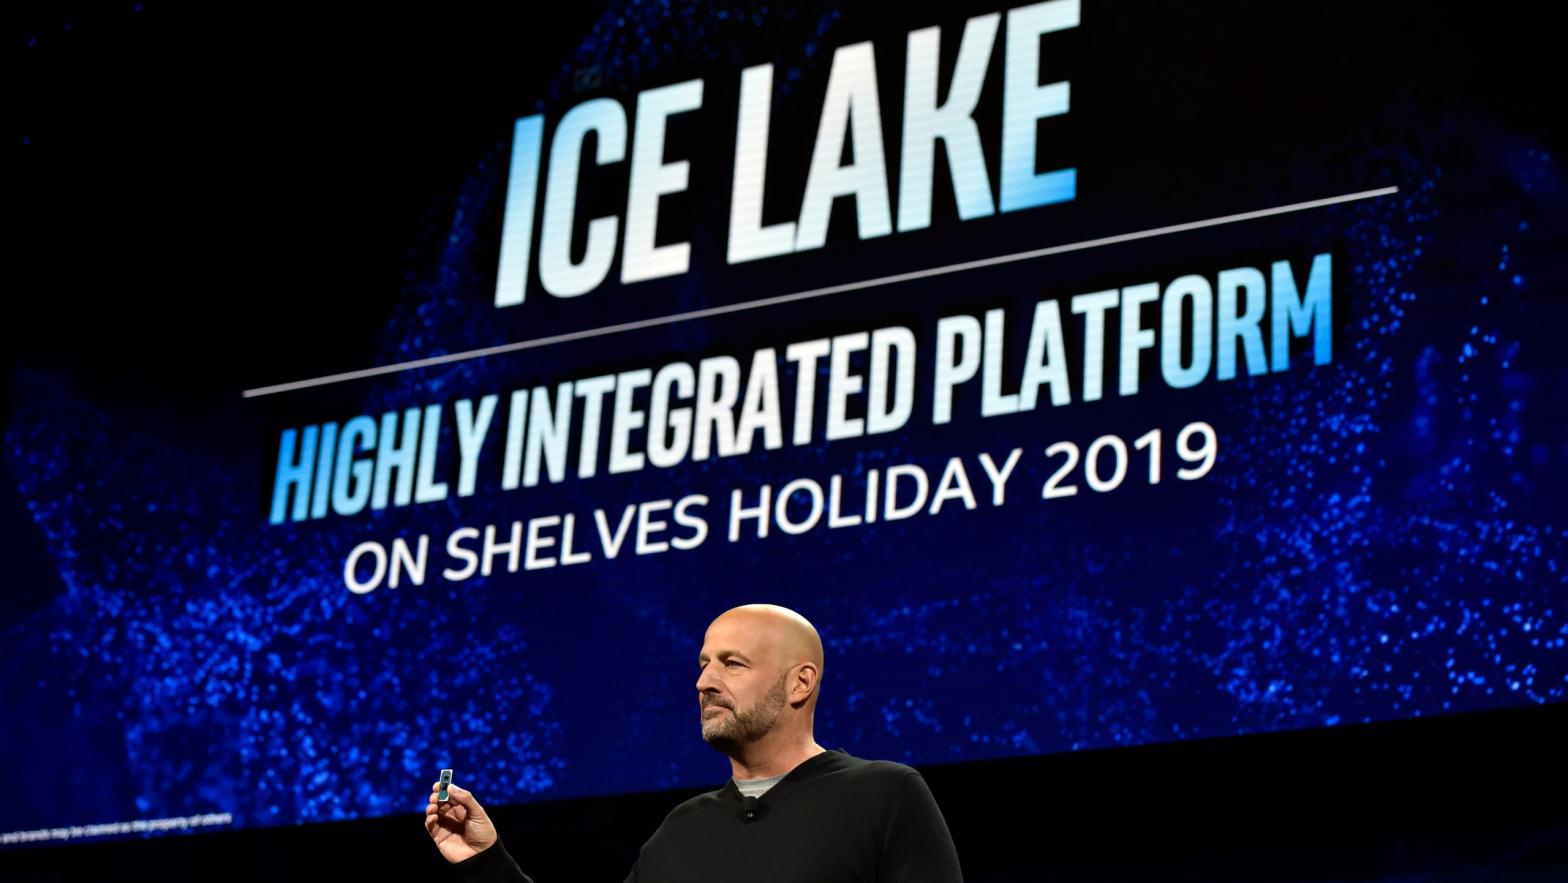 Intel Senior Vice President Gregory Bryant showing off an Ice Lake chip during an Intel press event at CES 2019. (Photo: David Becker, Getty Images)